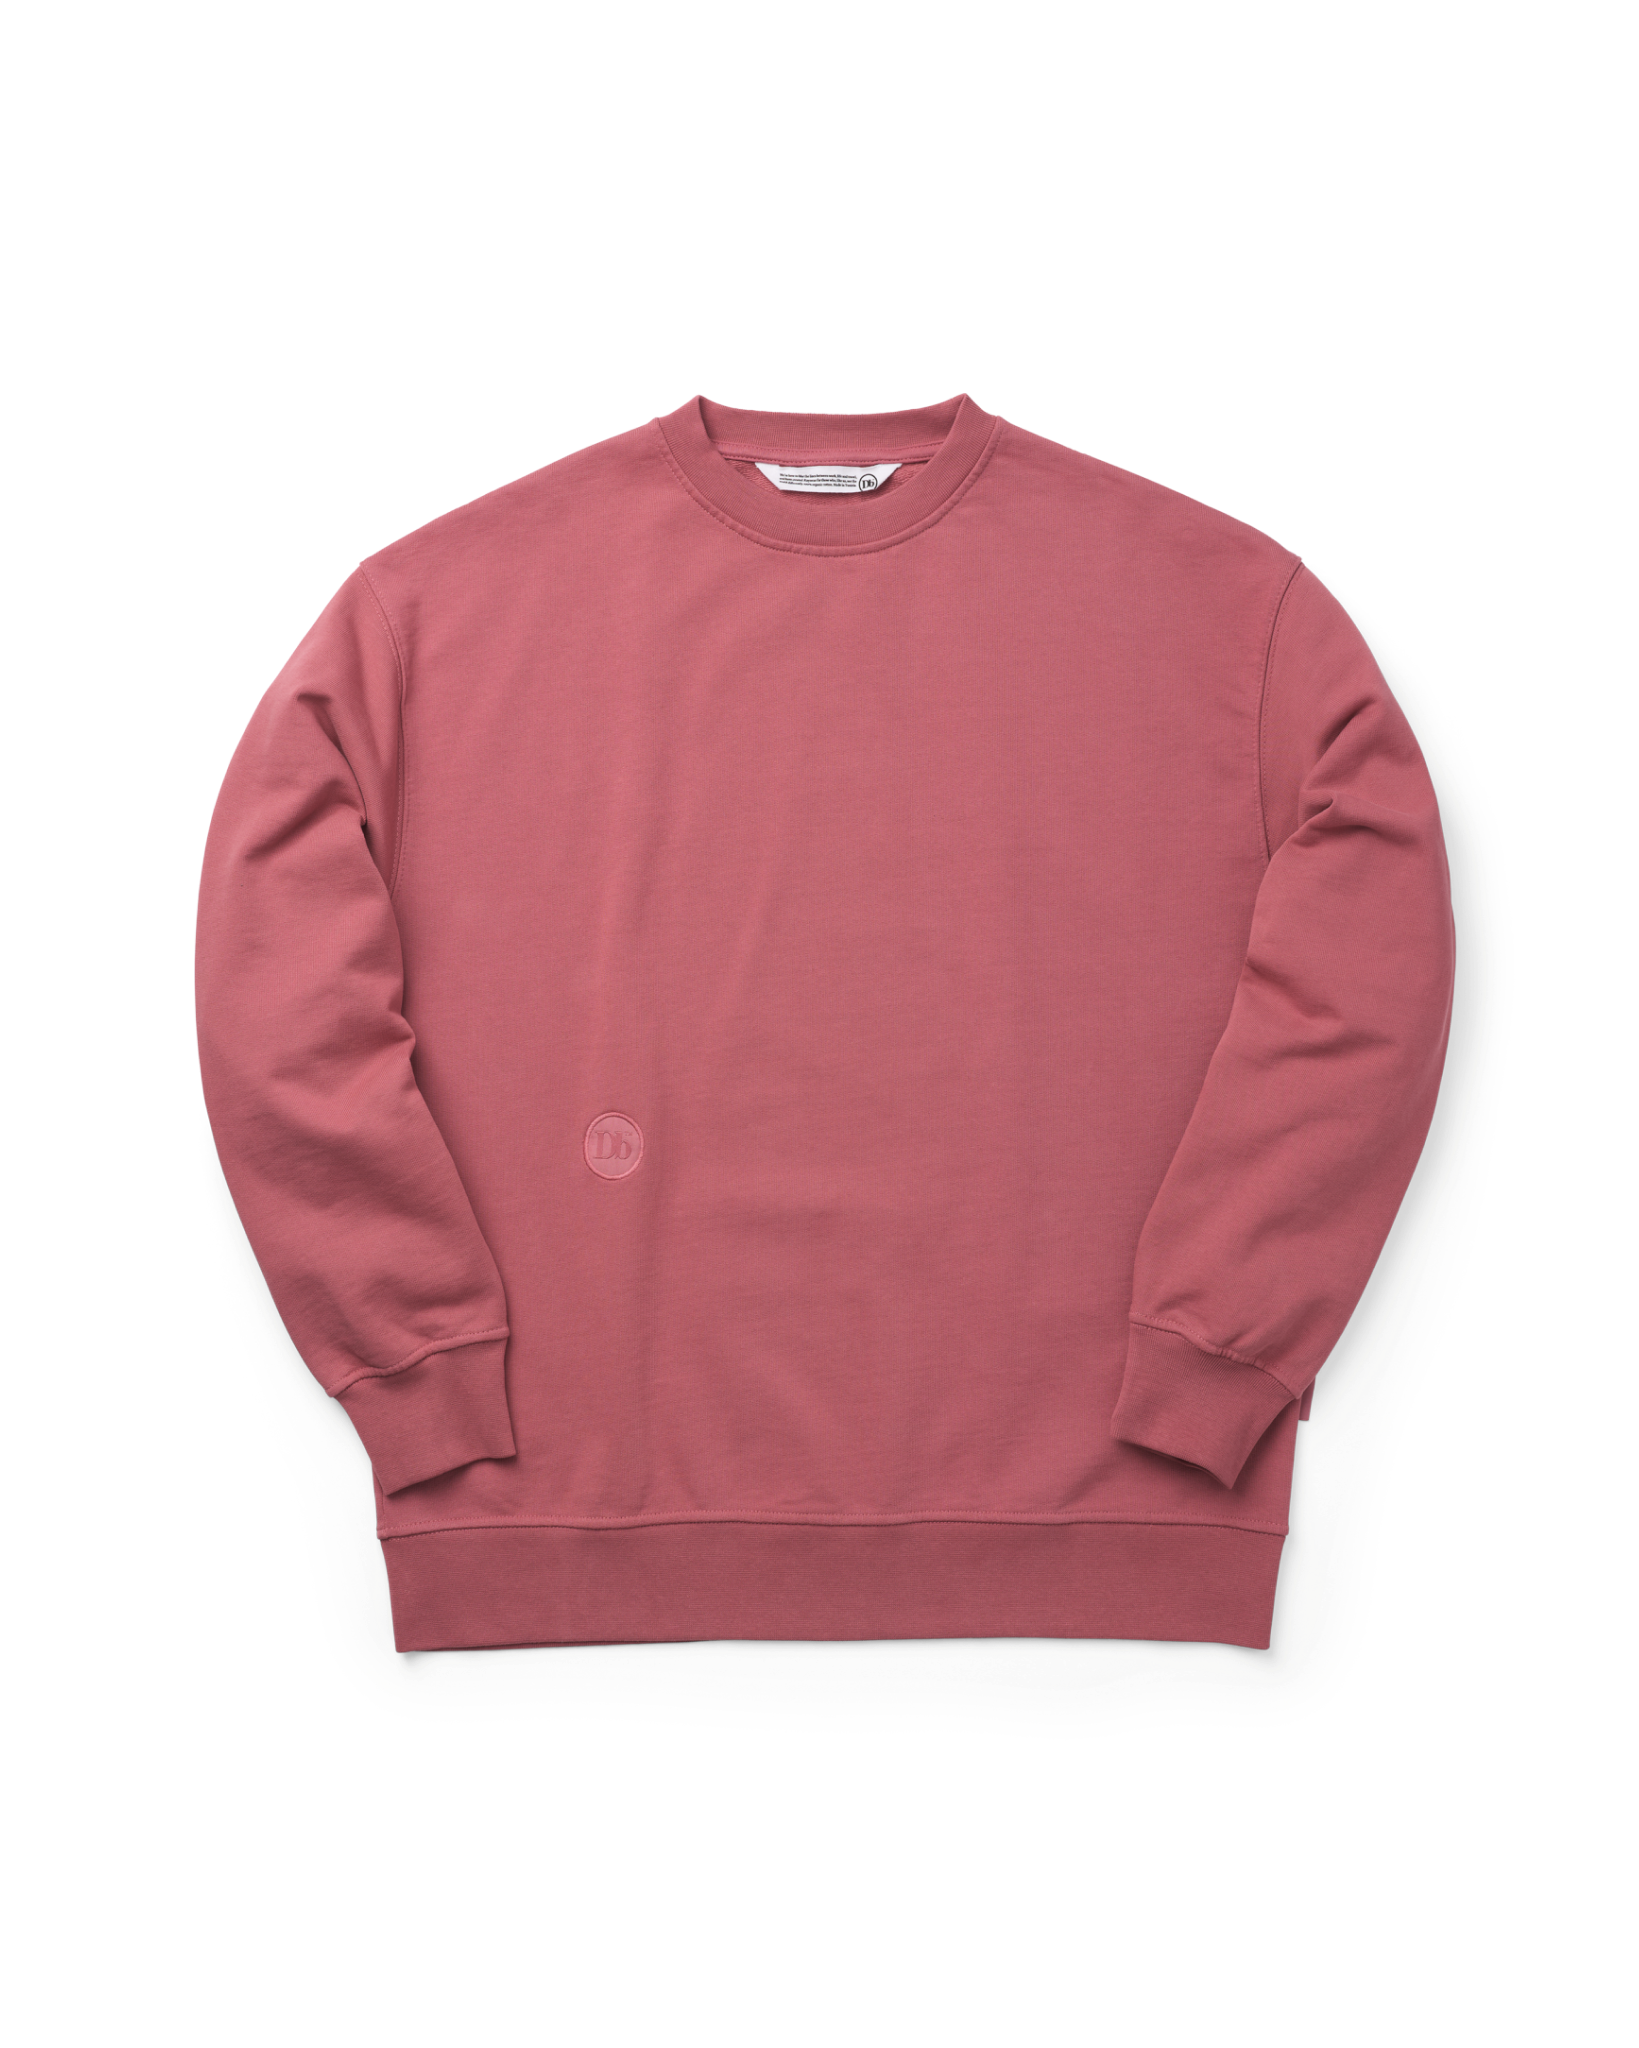 Anywear Crewneck Sunbleached Red - XL / Sunbleached Red